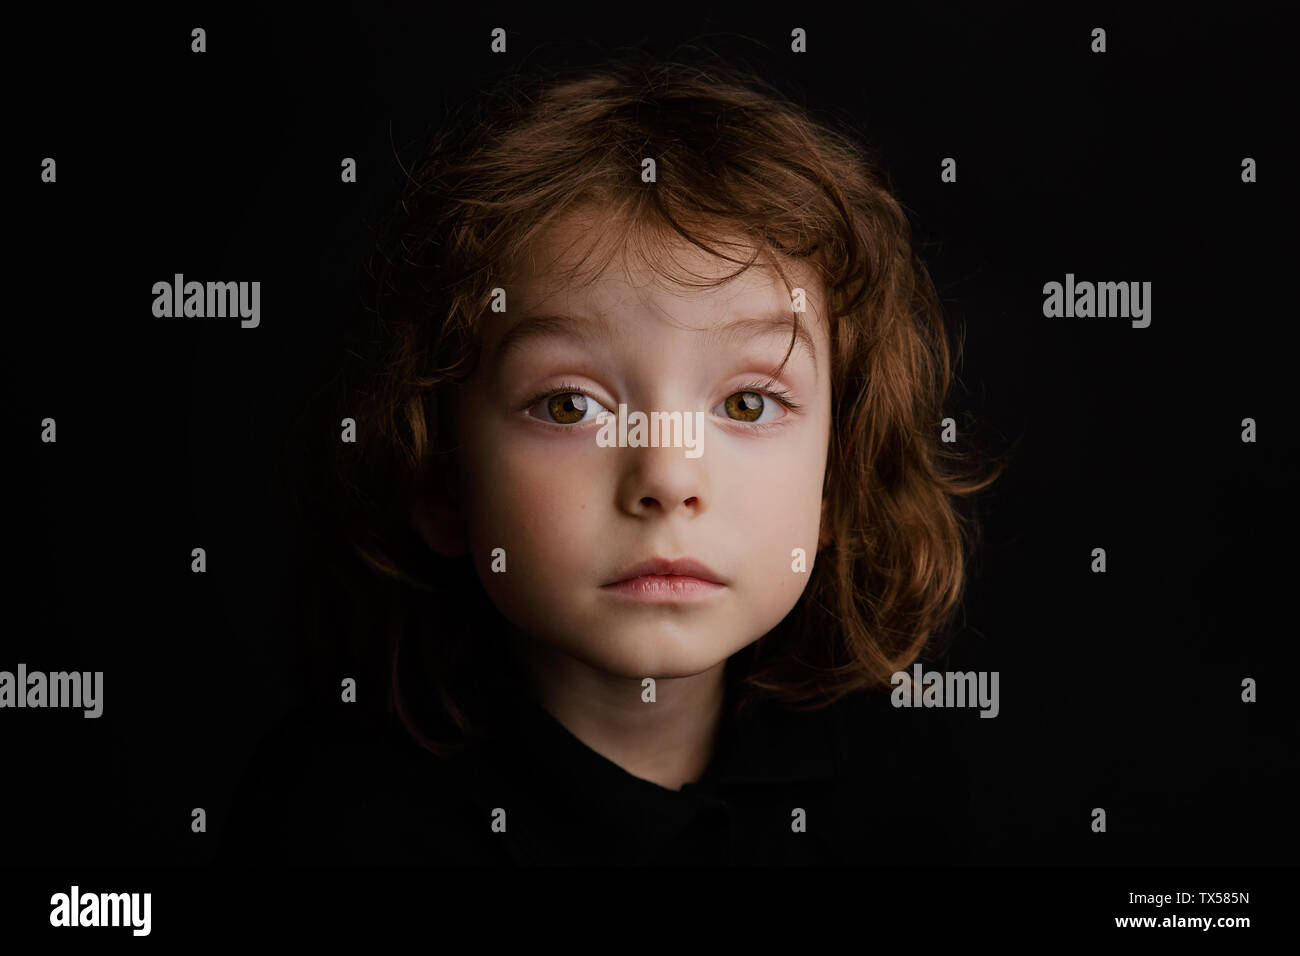 5 year old boy with long hair studio portrait on black background Stock Photo